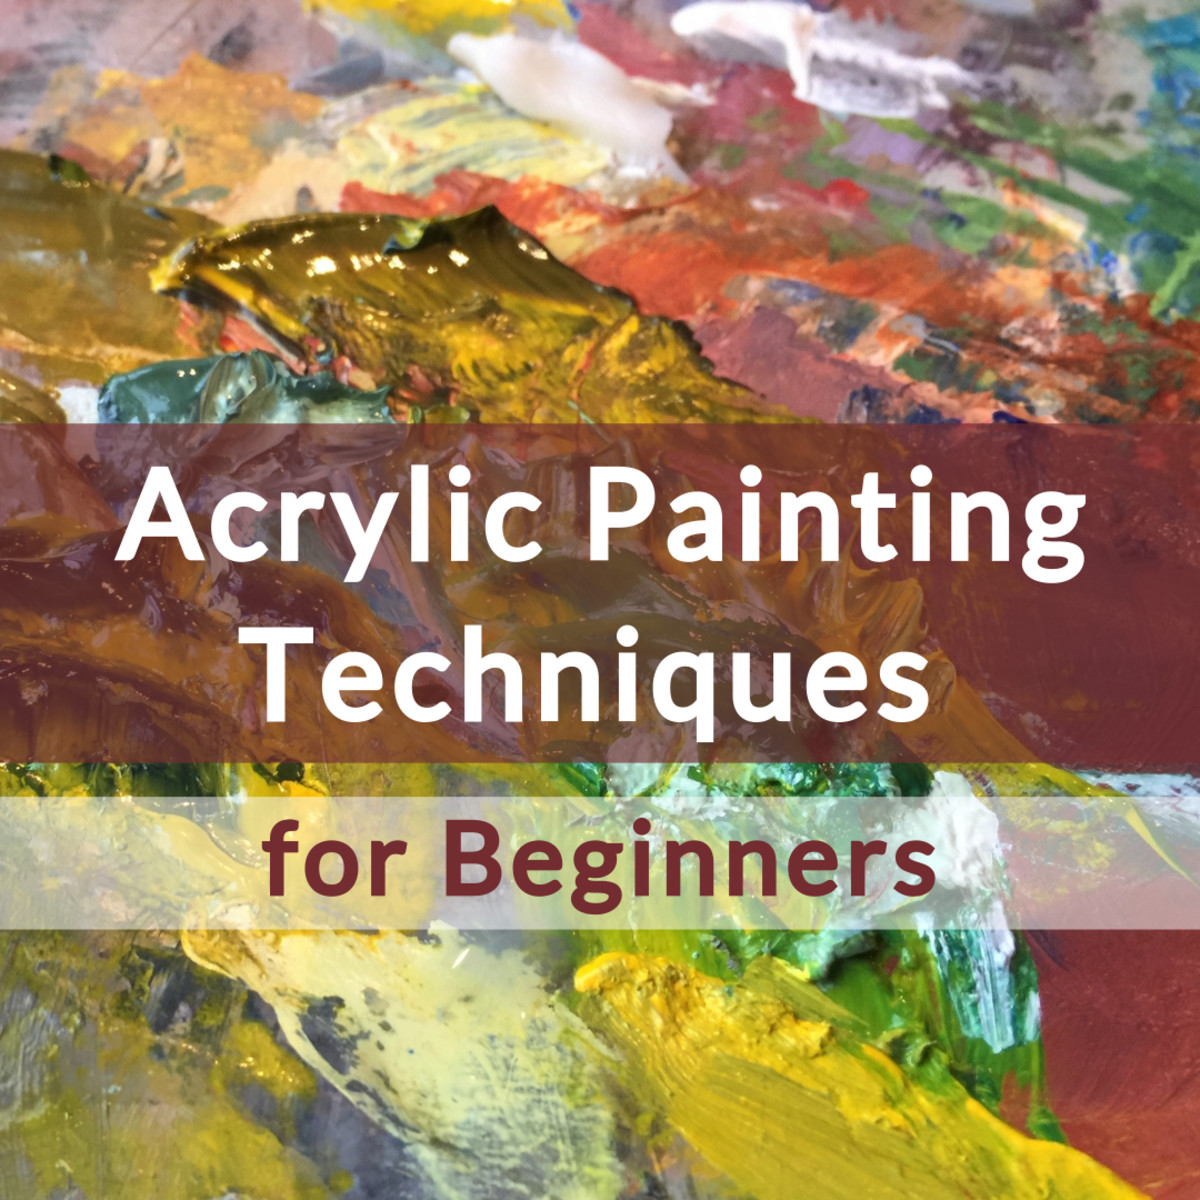 6 Basic Acrylic Painting Techniques for Beginners